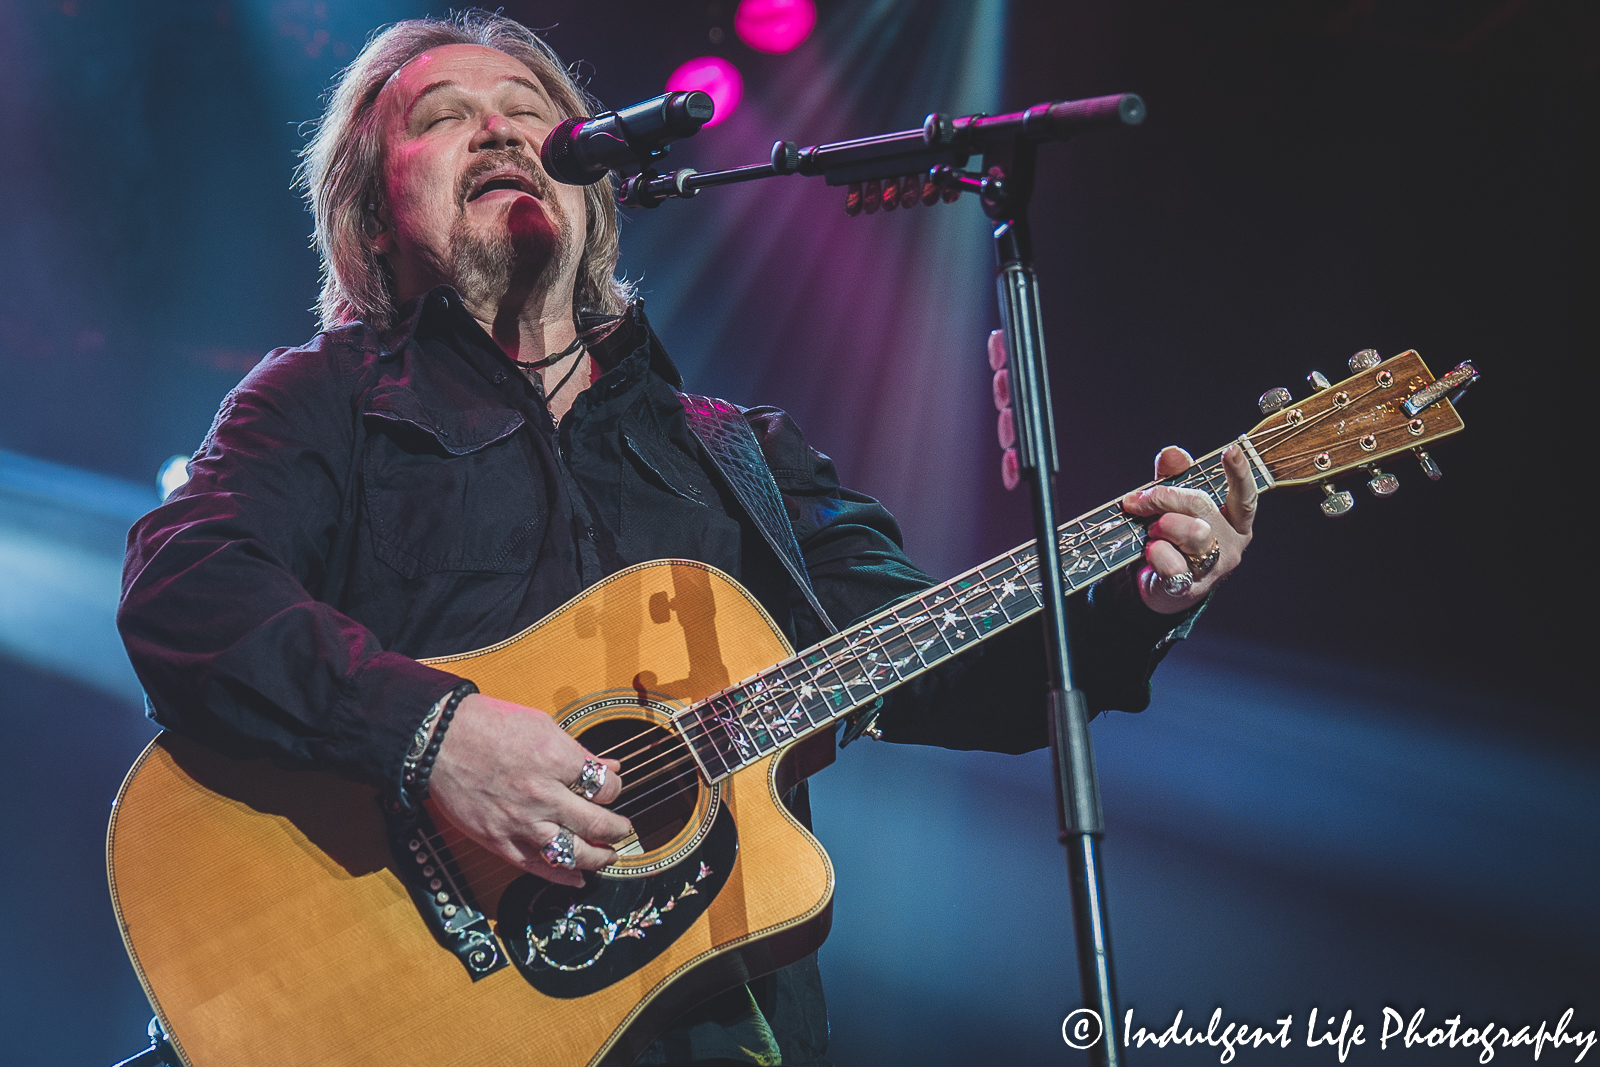 Country music superstar Travis Tritt playing the acoustic guitar as he performs "I'm Gonna Be Somebody" at Star Pavilion inside of Ameristar Casino in Kansas City, MO on December 3, 2021.